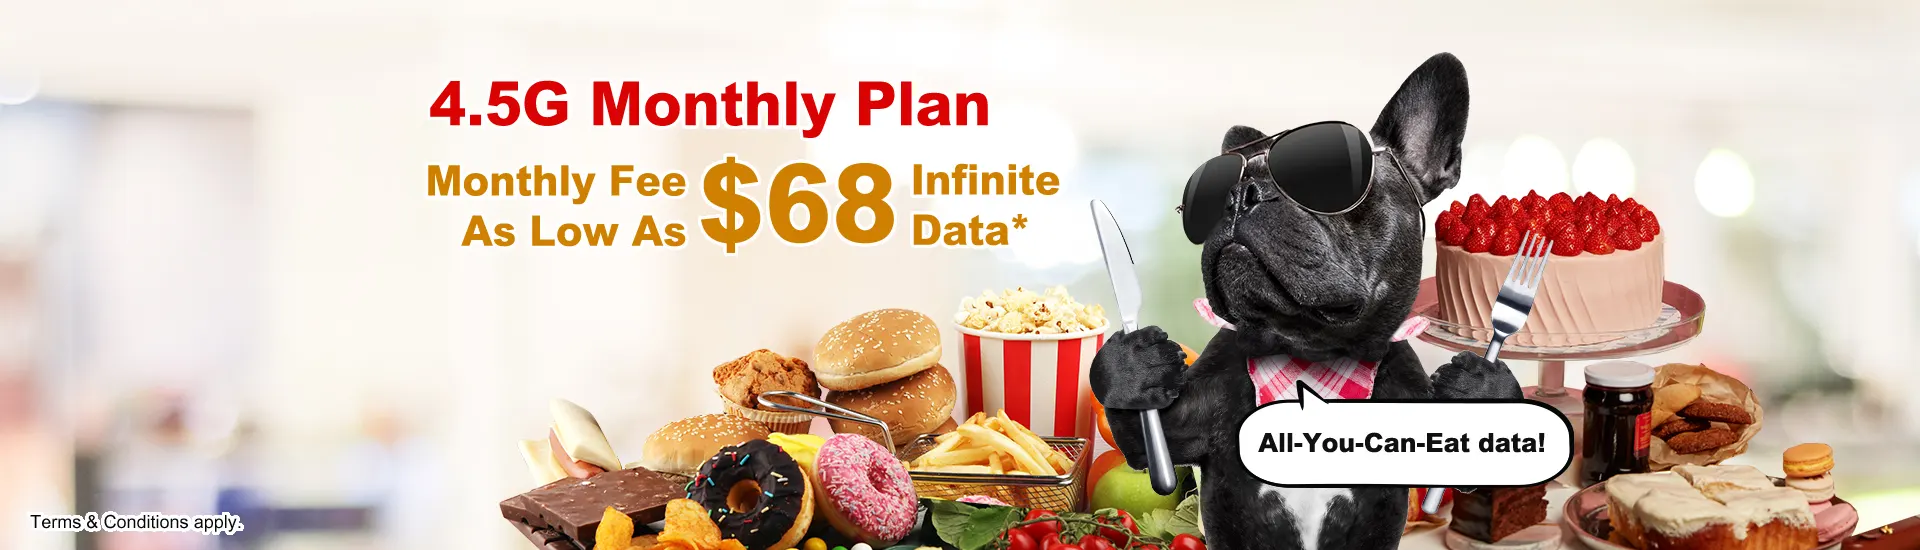 4.5G Monthly Plan, Monthly Fee As Low As $68, Infinite Data